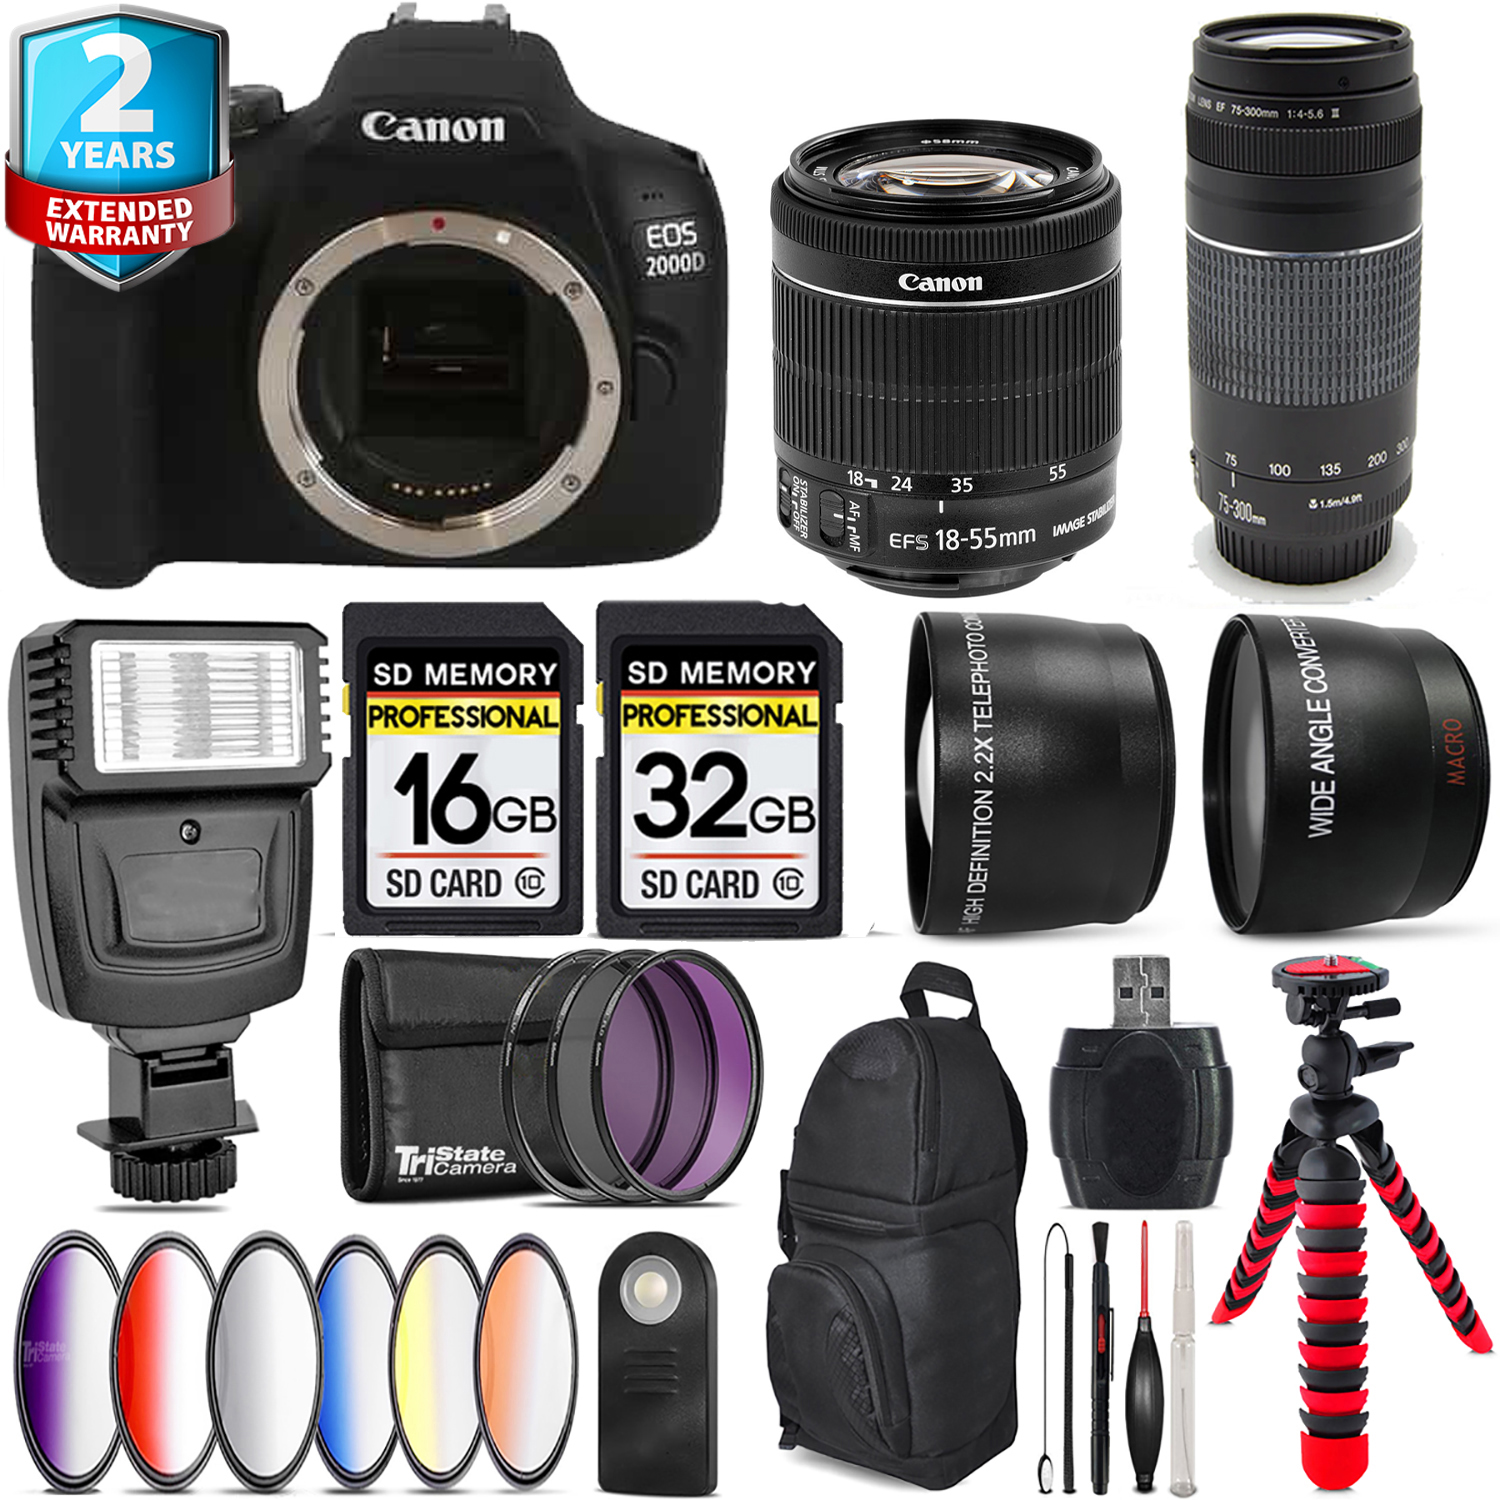 Canon EOS 2000D DSLR Camera with 18-55mm, 75-300mm, & 50mm Canon